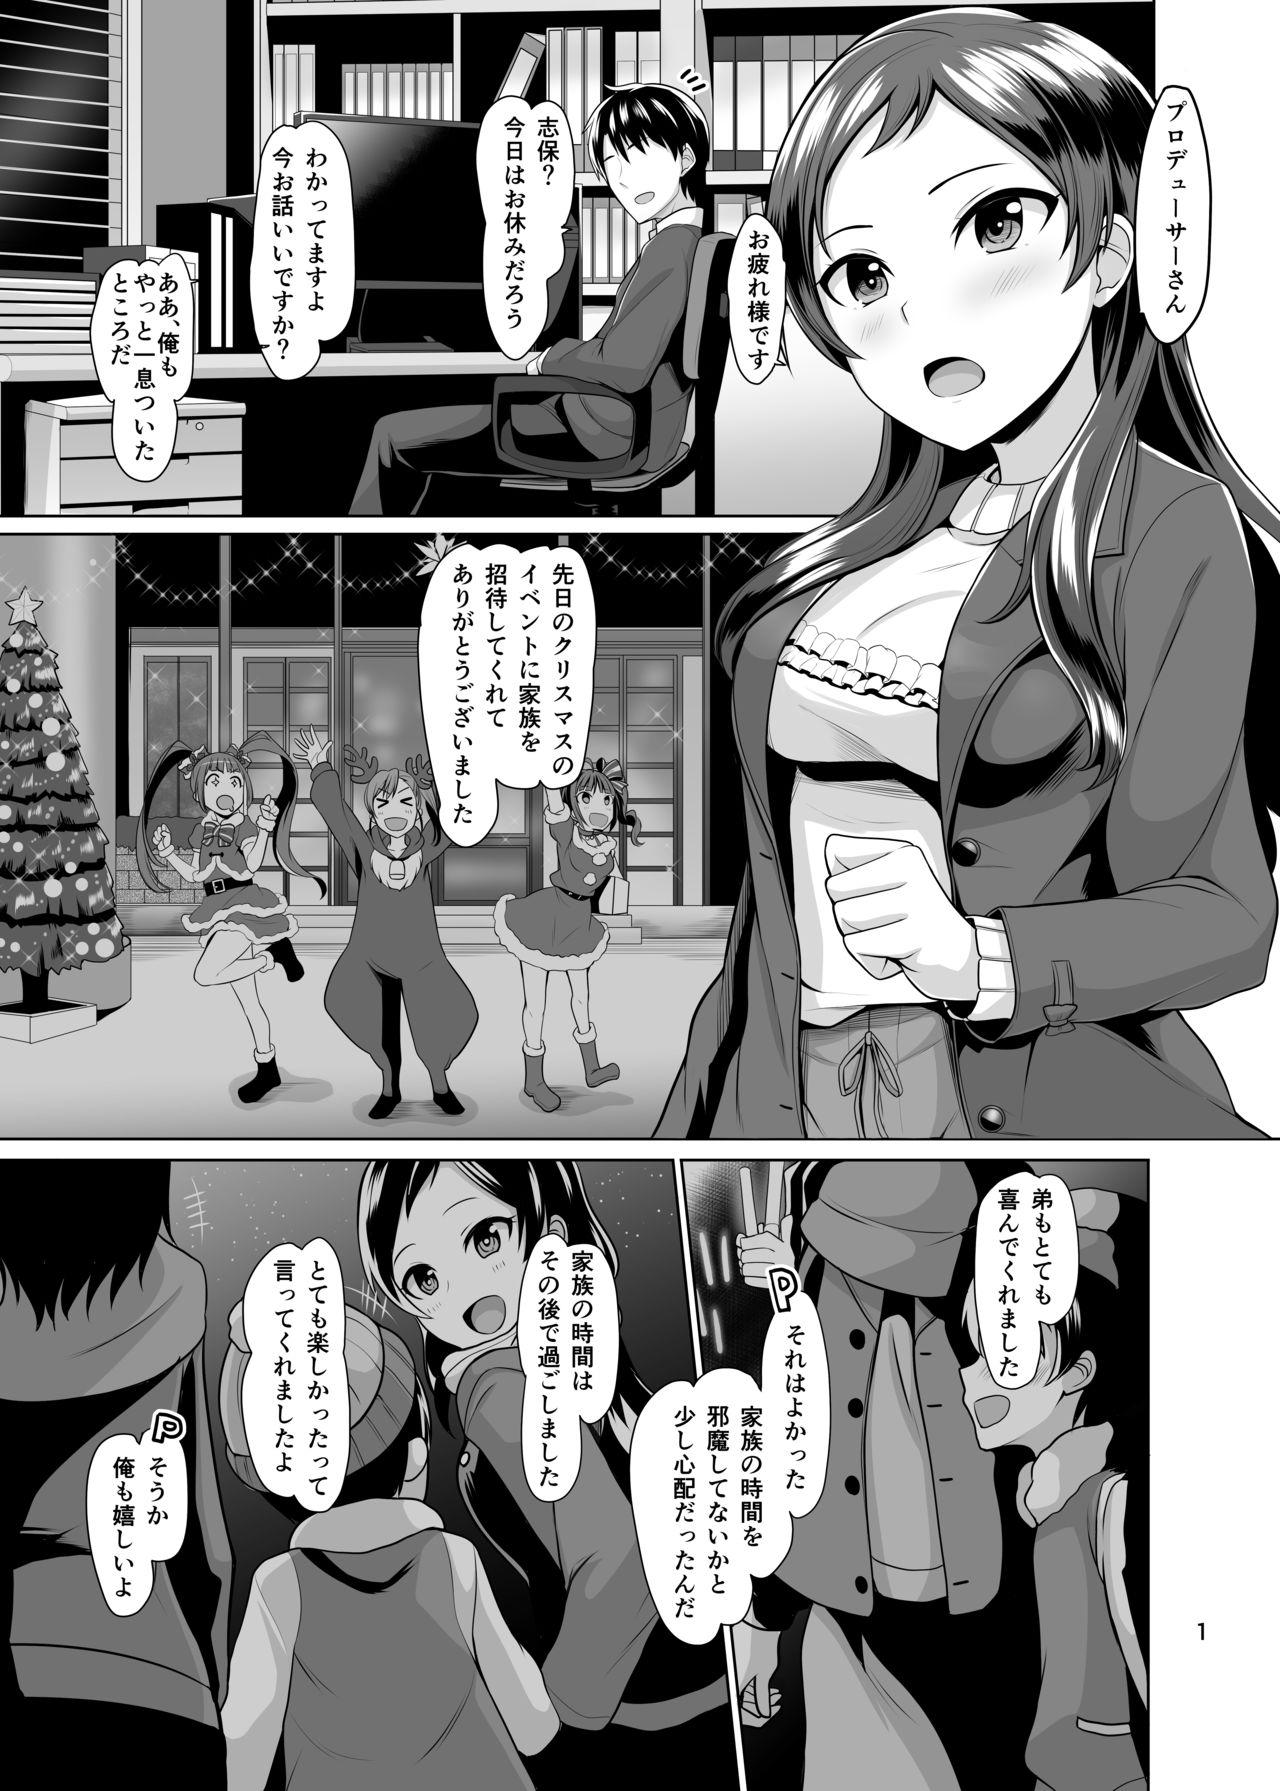 Naked The Present is... - The idolmaster Scandal - Page 2